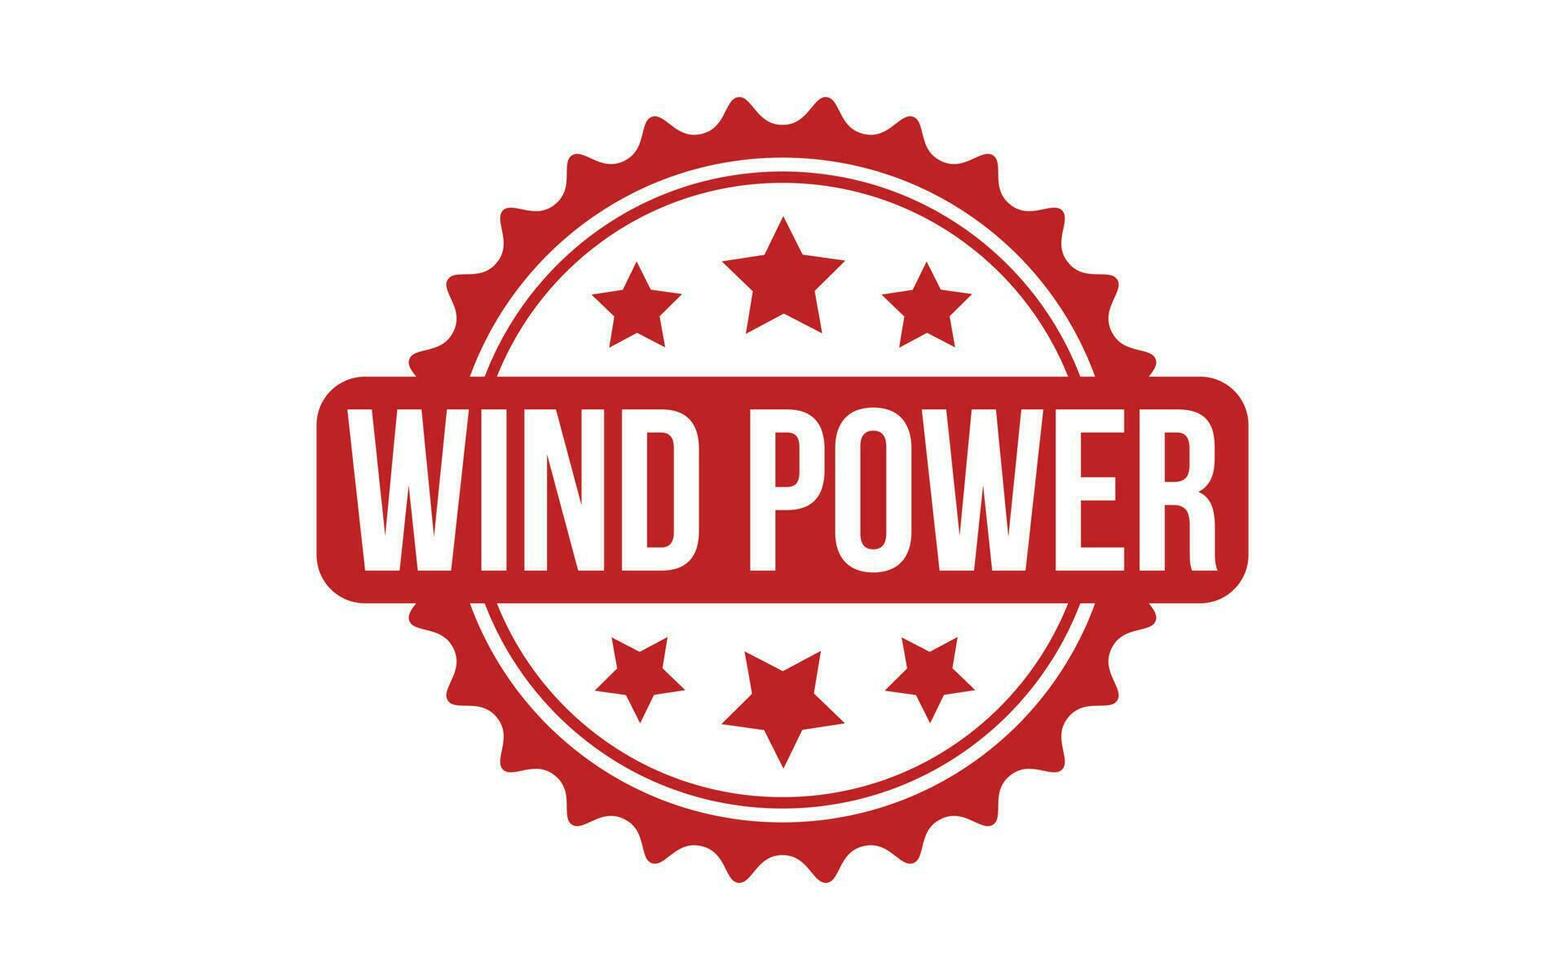 Red Wind Power Rubber Stamp Seal Vector